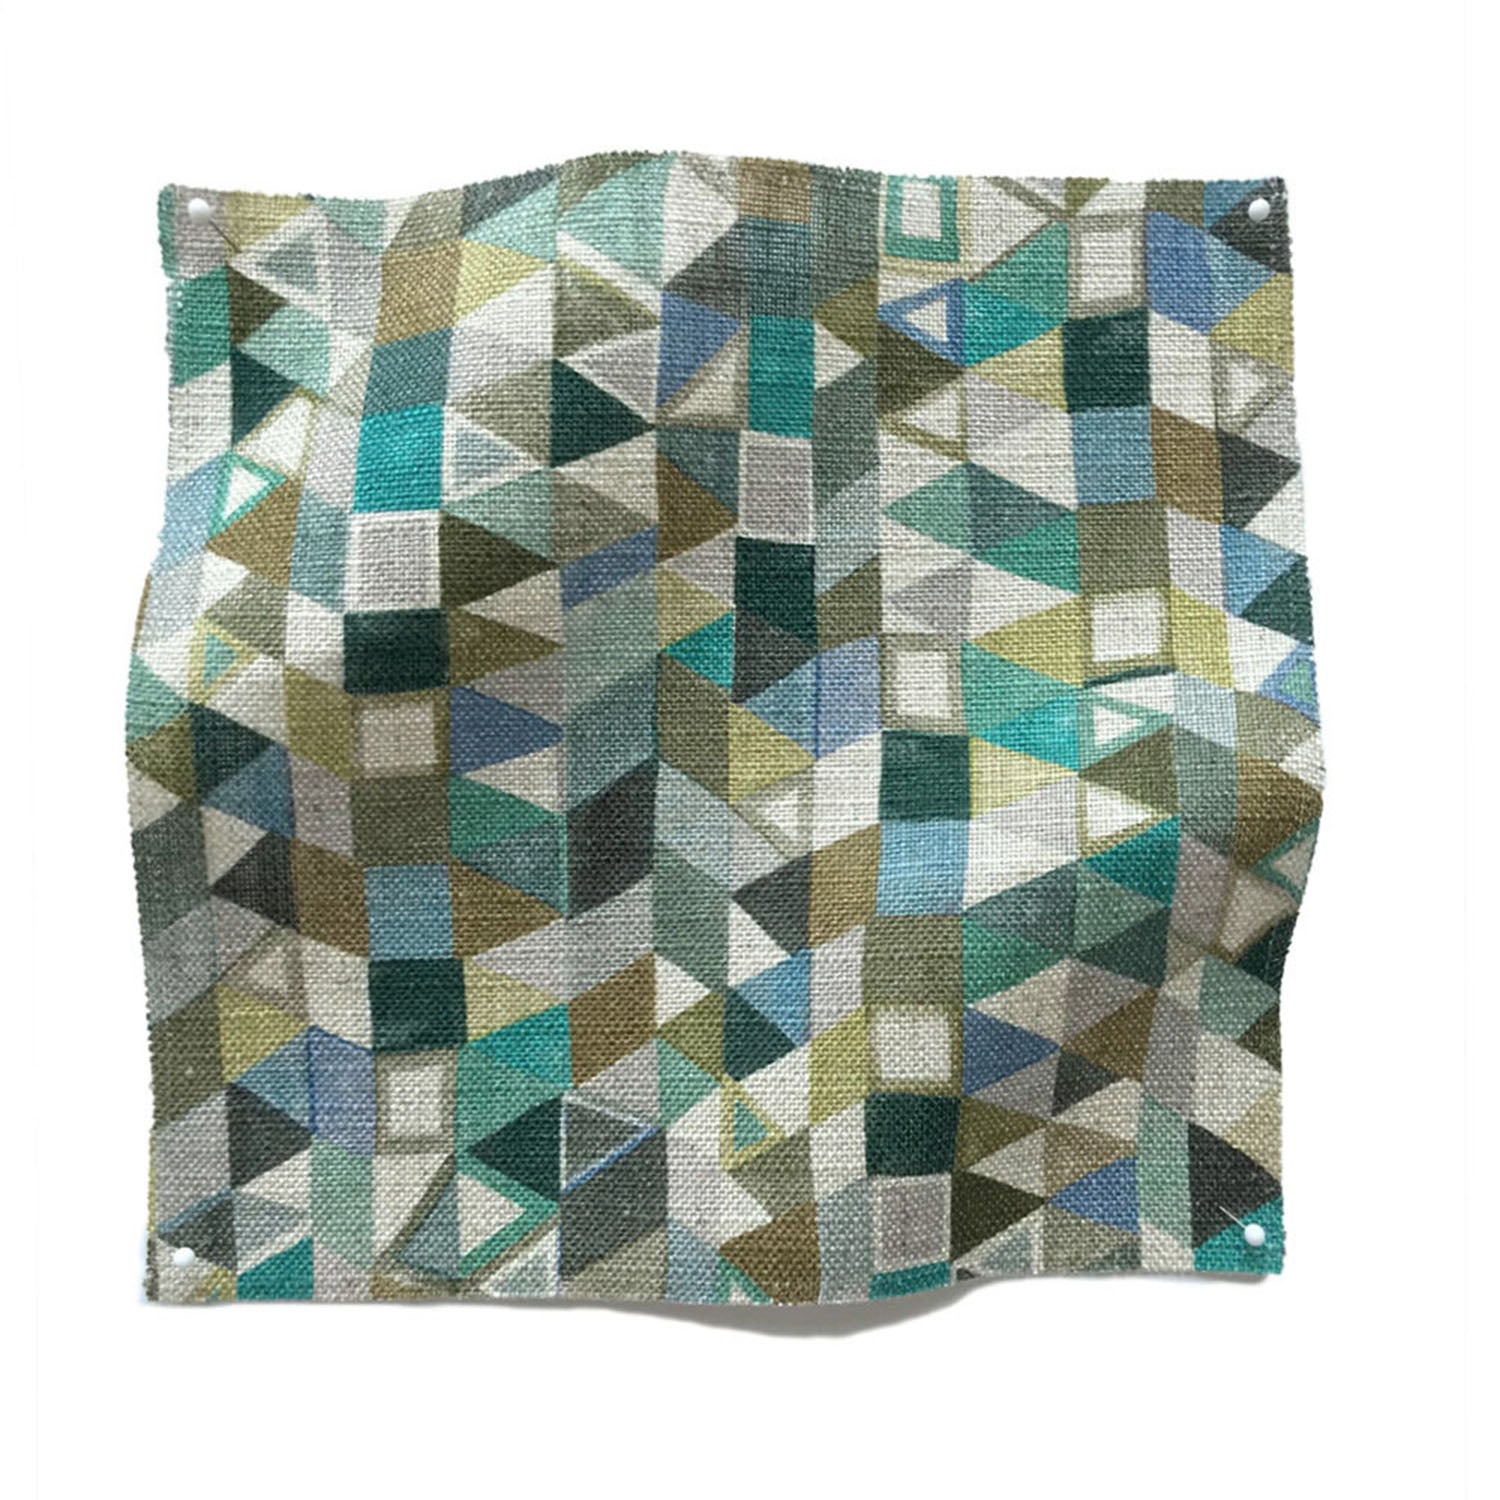 Square fabric swatch in a small-scale playful geometric print in shades of blue, green, white and brown.